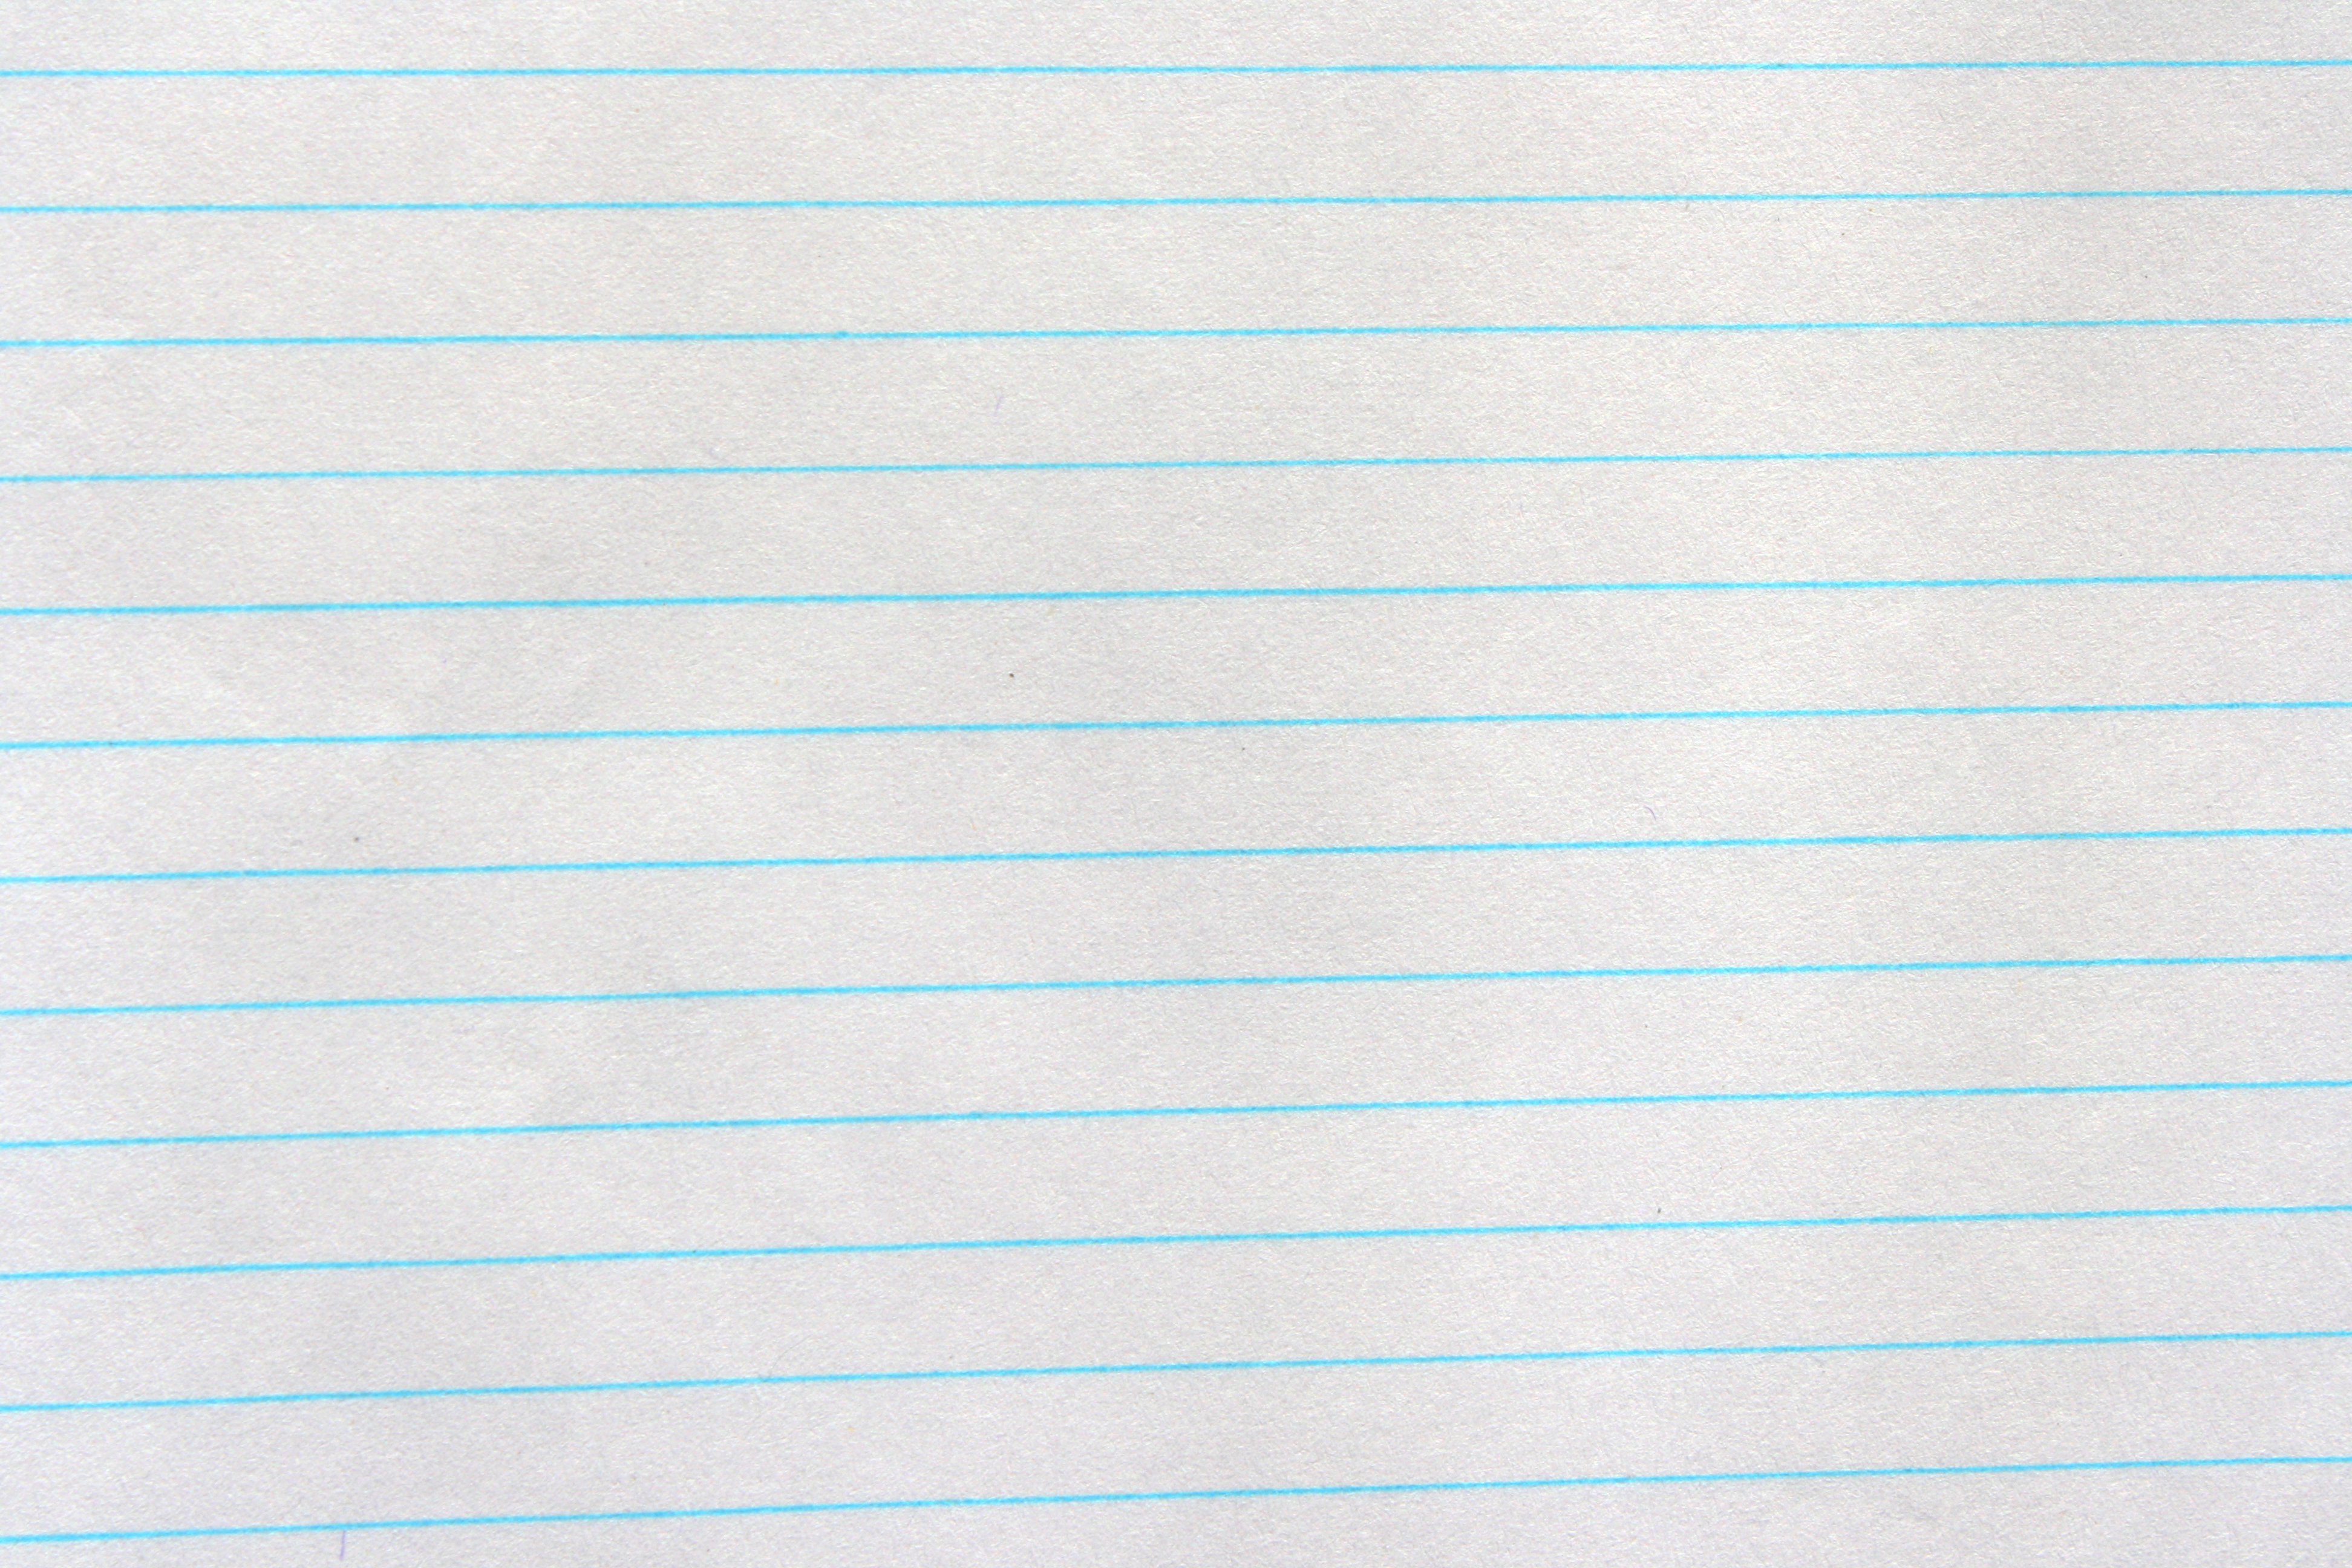 Notebook Paper Background Texture